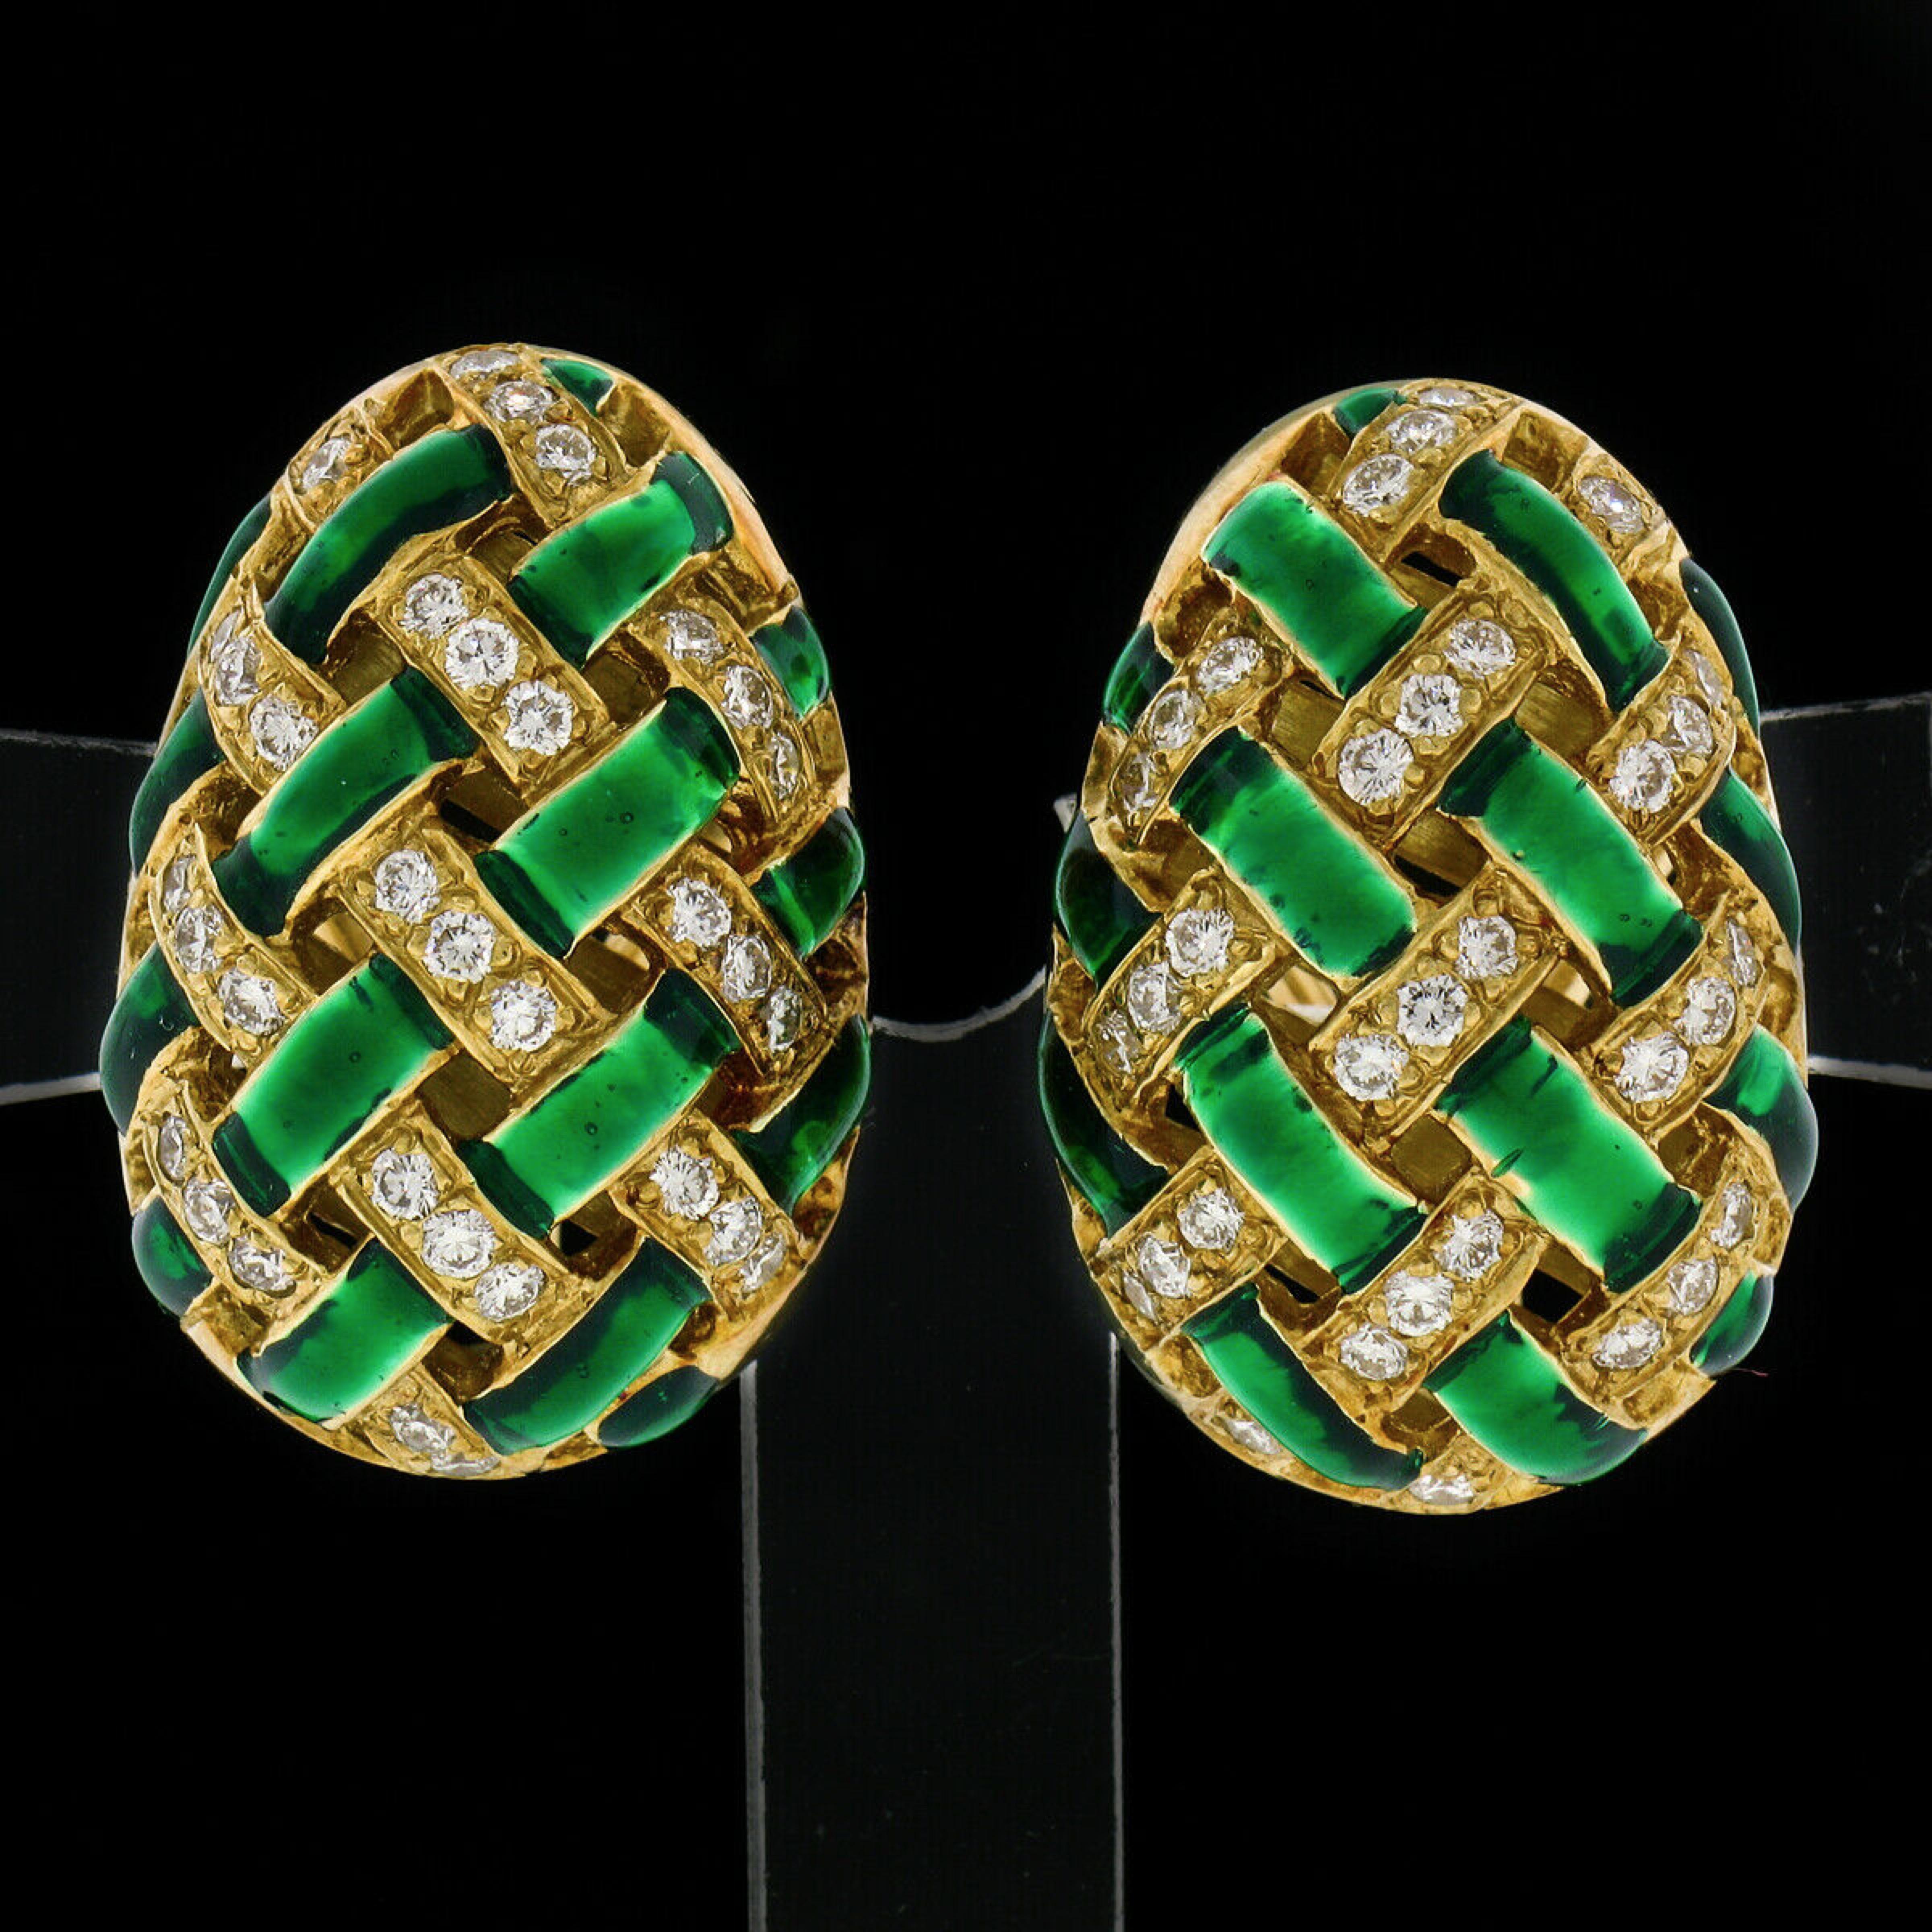 Here we have a fabulous pair of vintage earrings very well crafted in solid 18k yellow gold and decorated neatly with vibrant green enamel and drenched with top quality diamonds throughout. The earrings are an egg shape with open braided basket